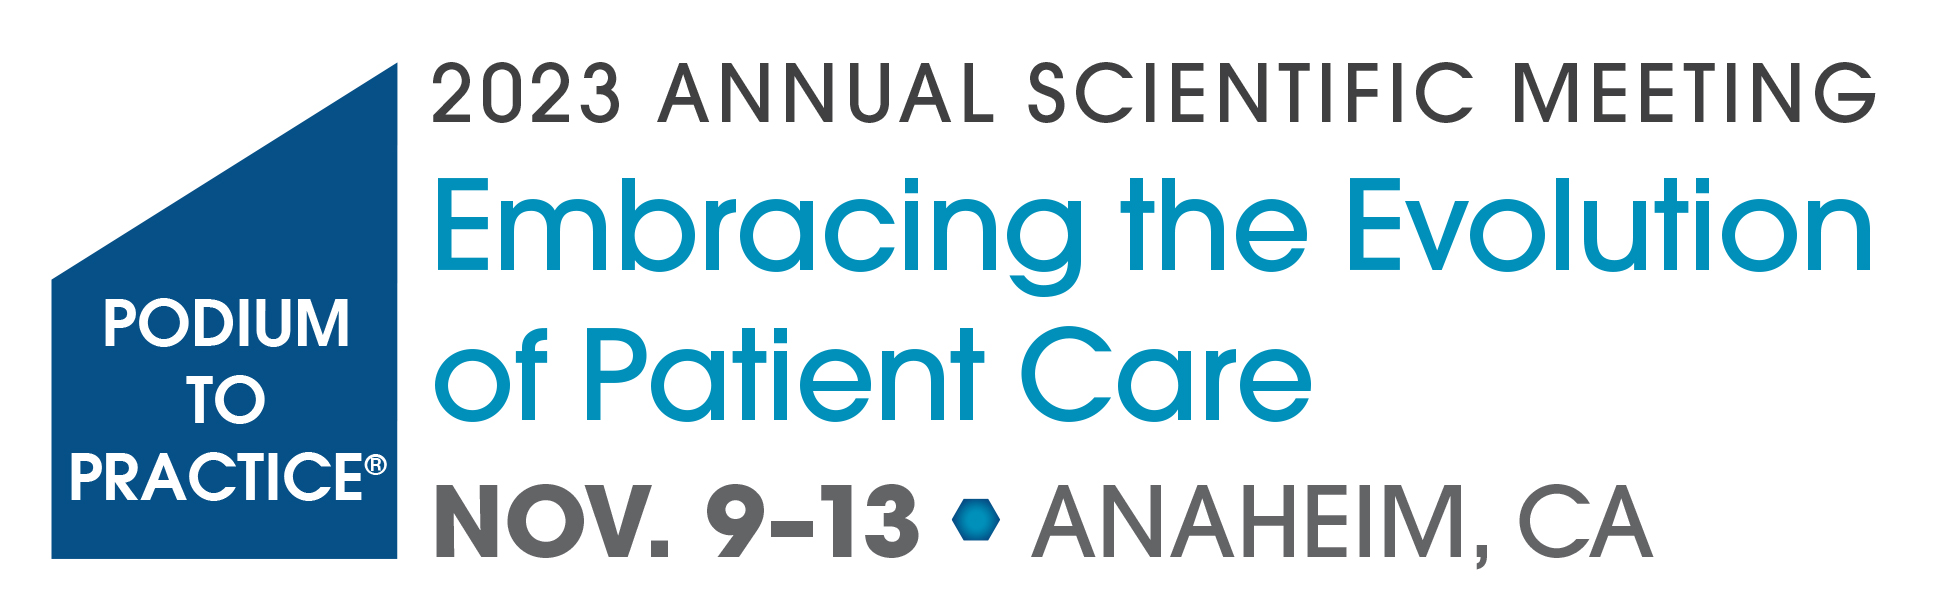 Home ACAAI 2023 Annual Scientific Meeting Marketing Opportunities